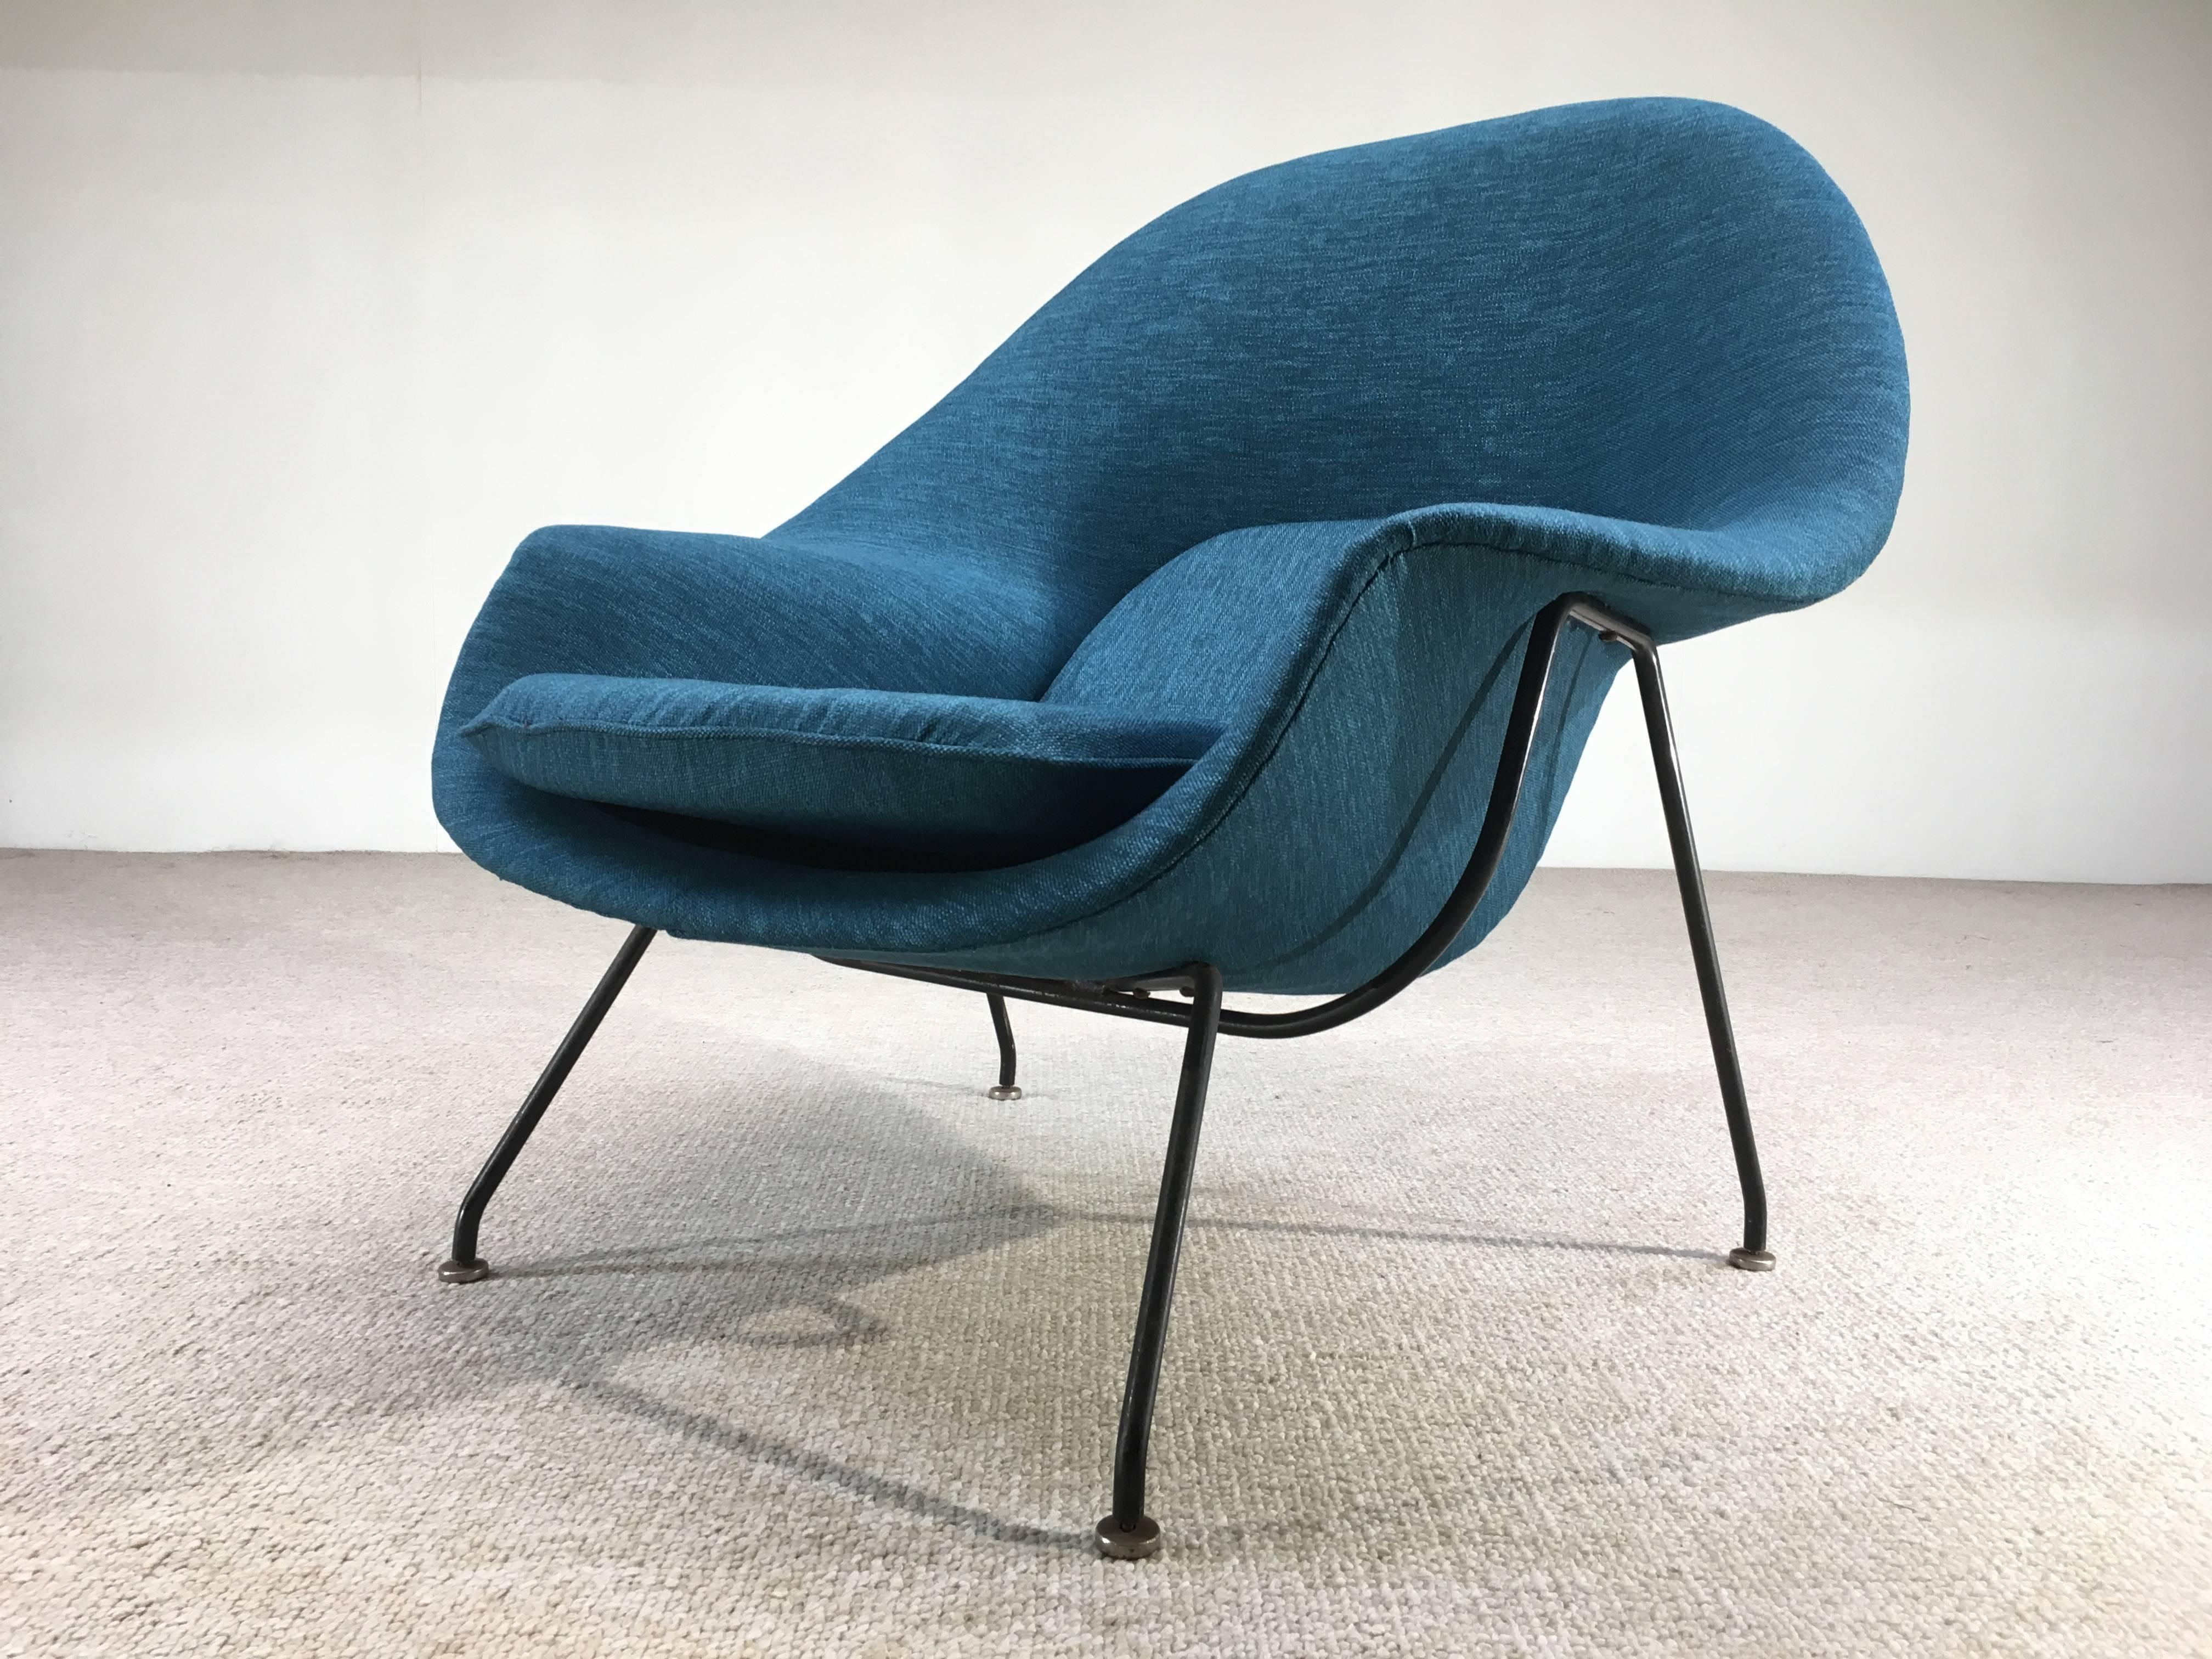 An early 3rd generation Eero Saarinen Womb chair having black iron base and signature stainless steel glides. Newly reupholstered in cotton/poly tweed. There are four tuft buttons underneath the cushion.